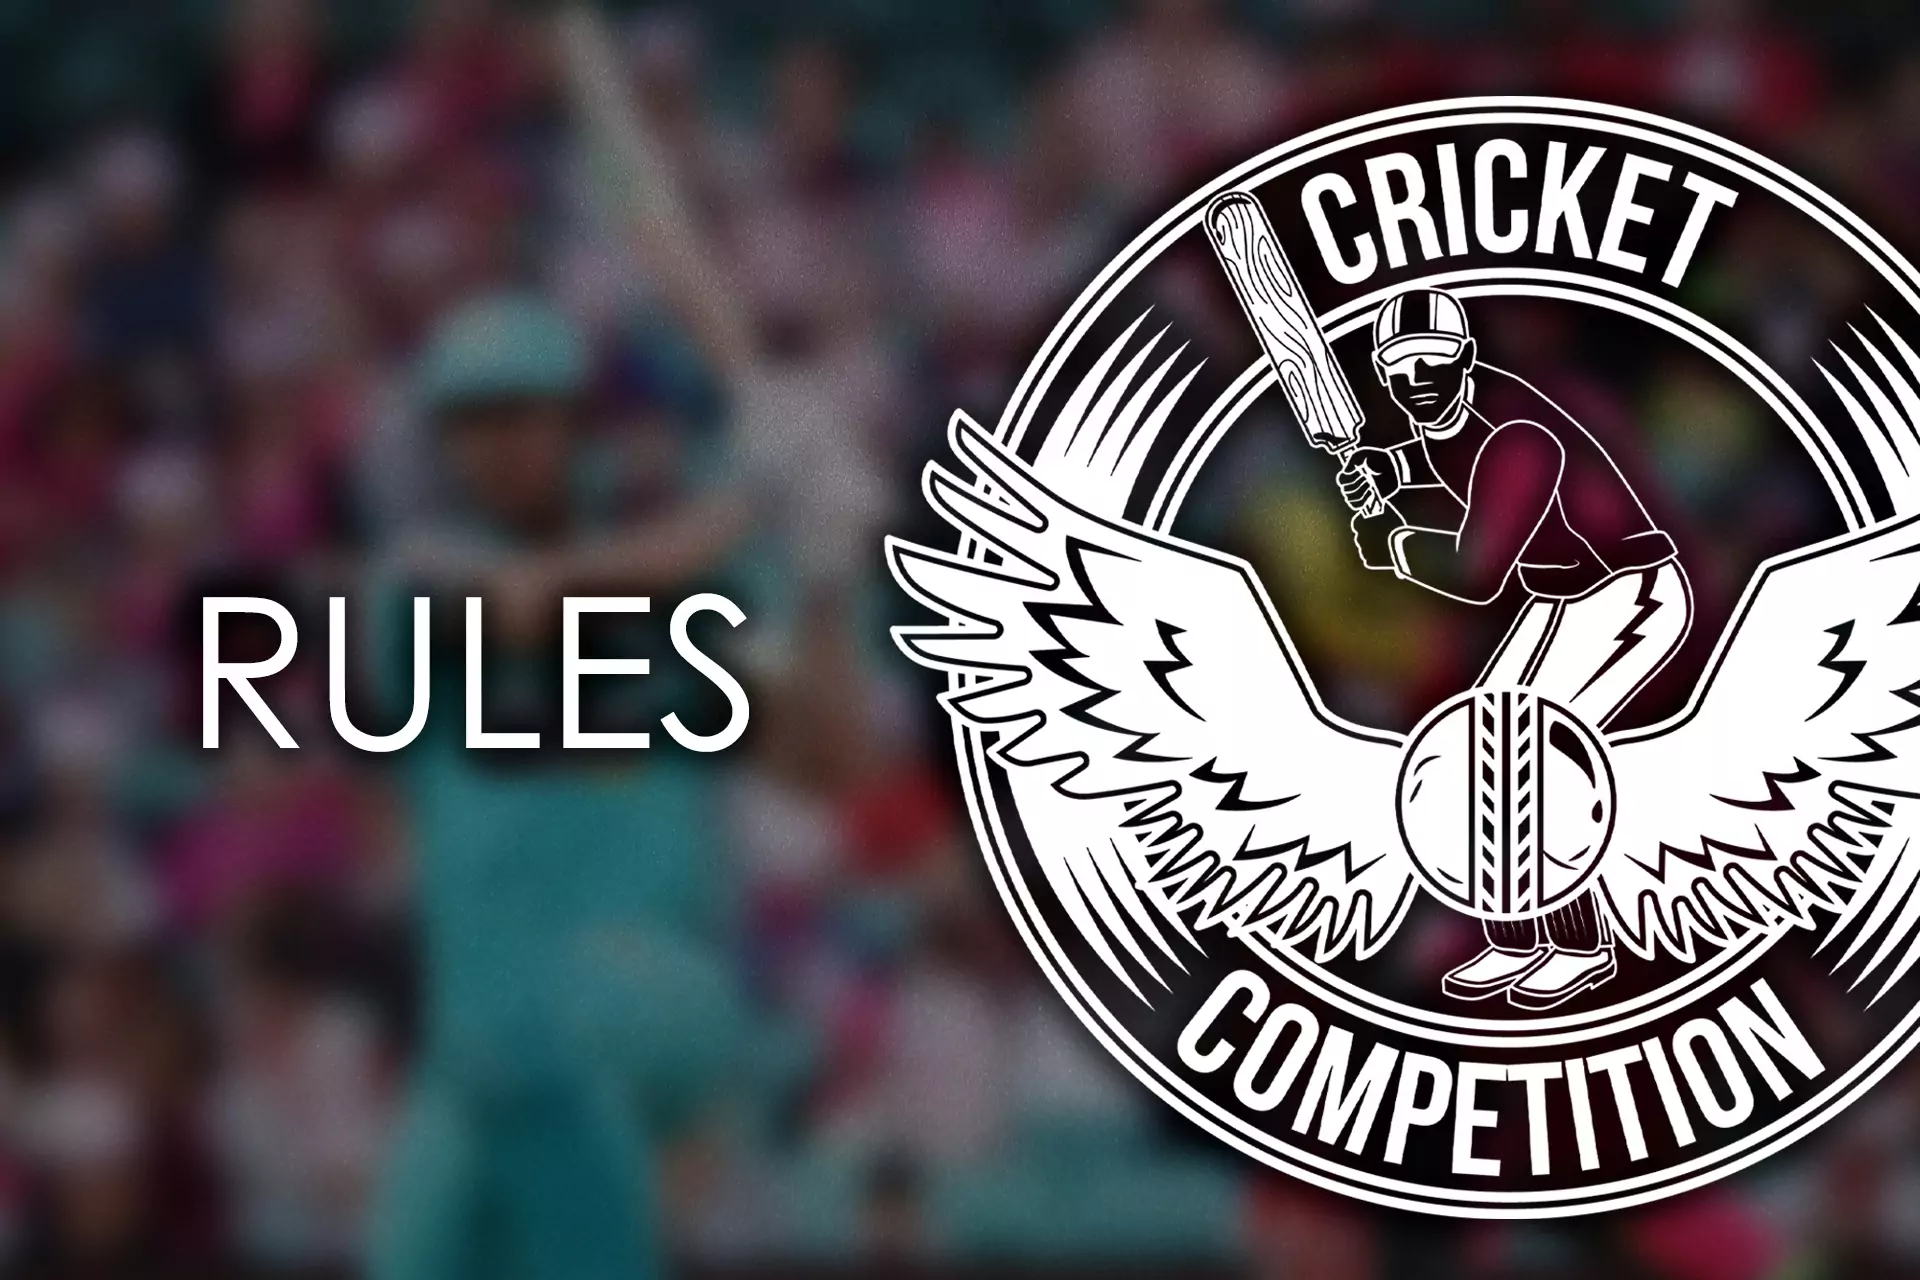 The rules of the Big Bash League matches are close to the rules of other cricket championships.